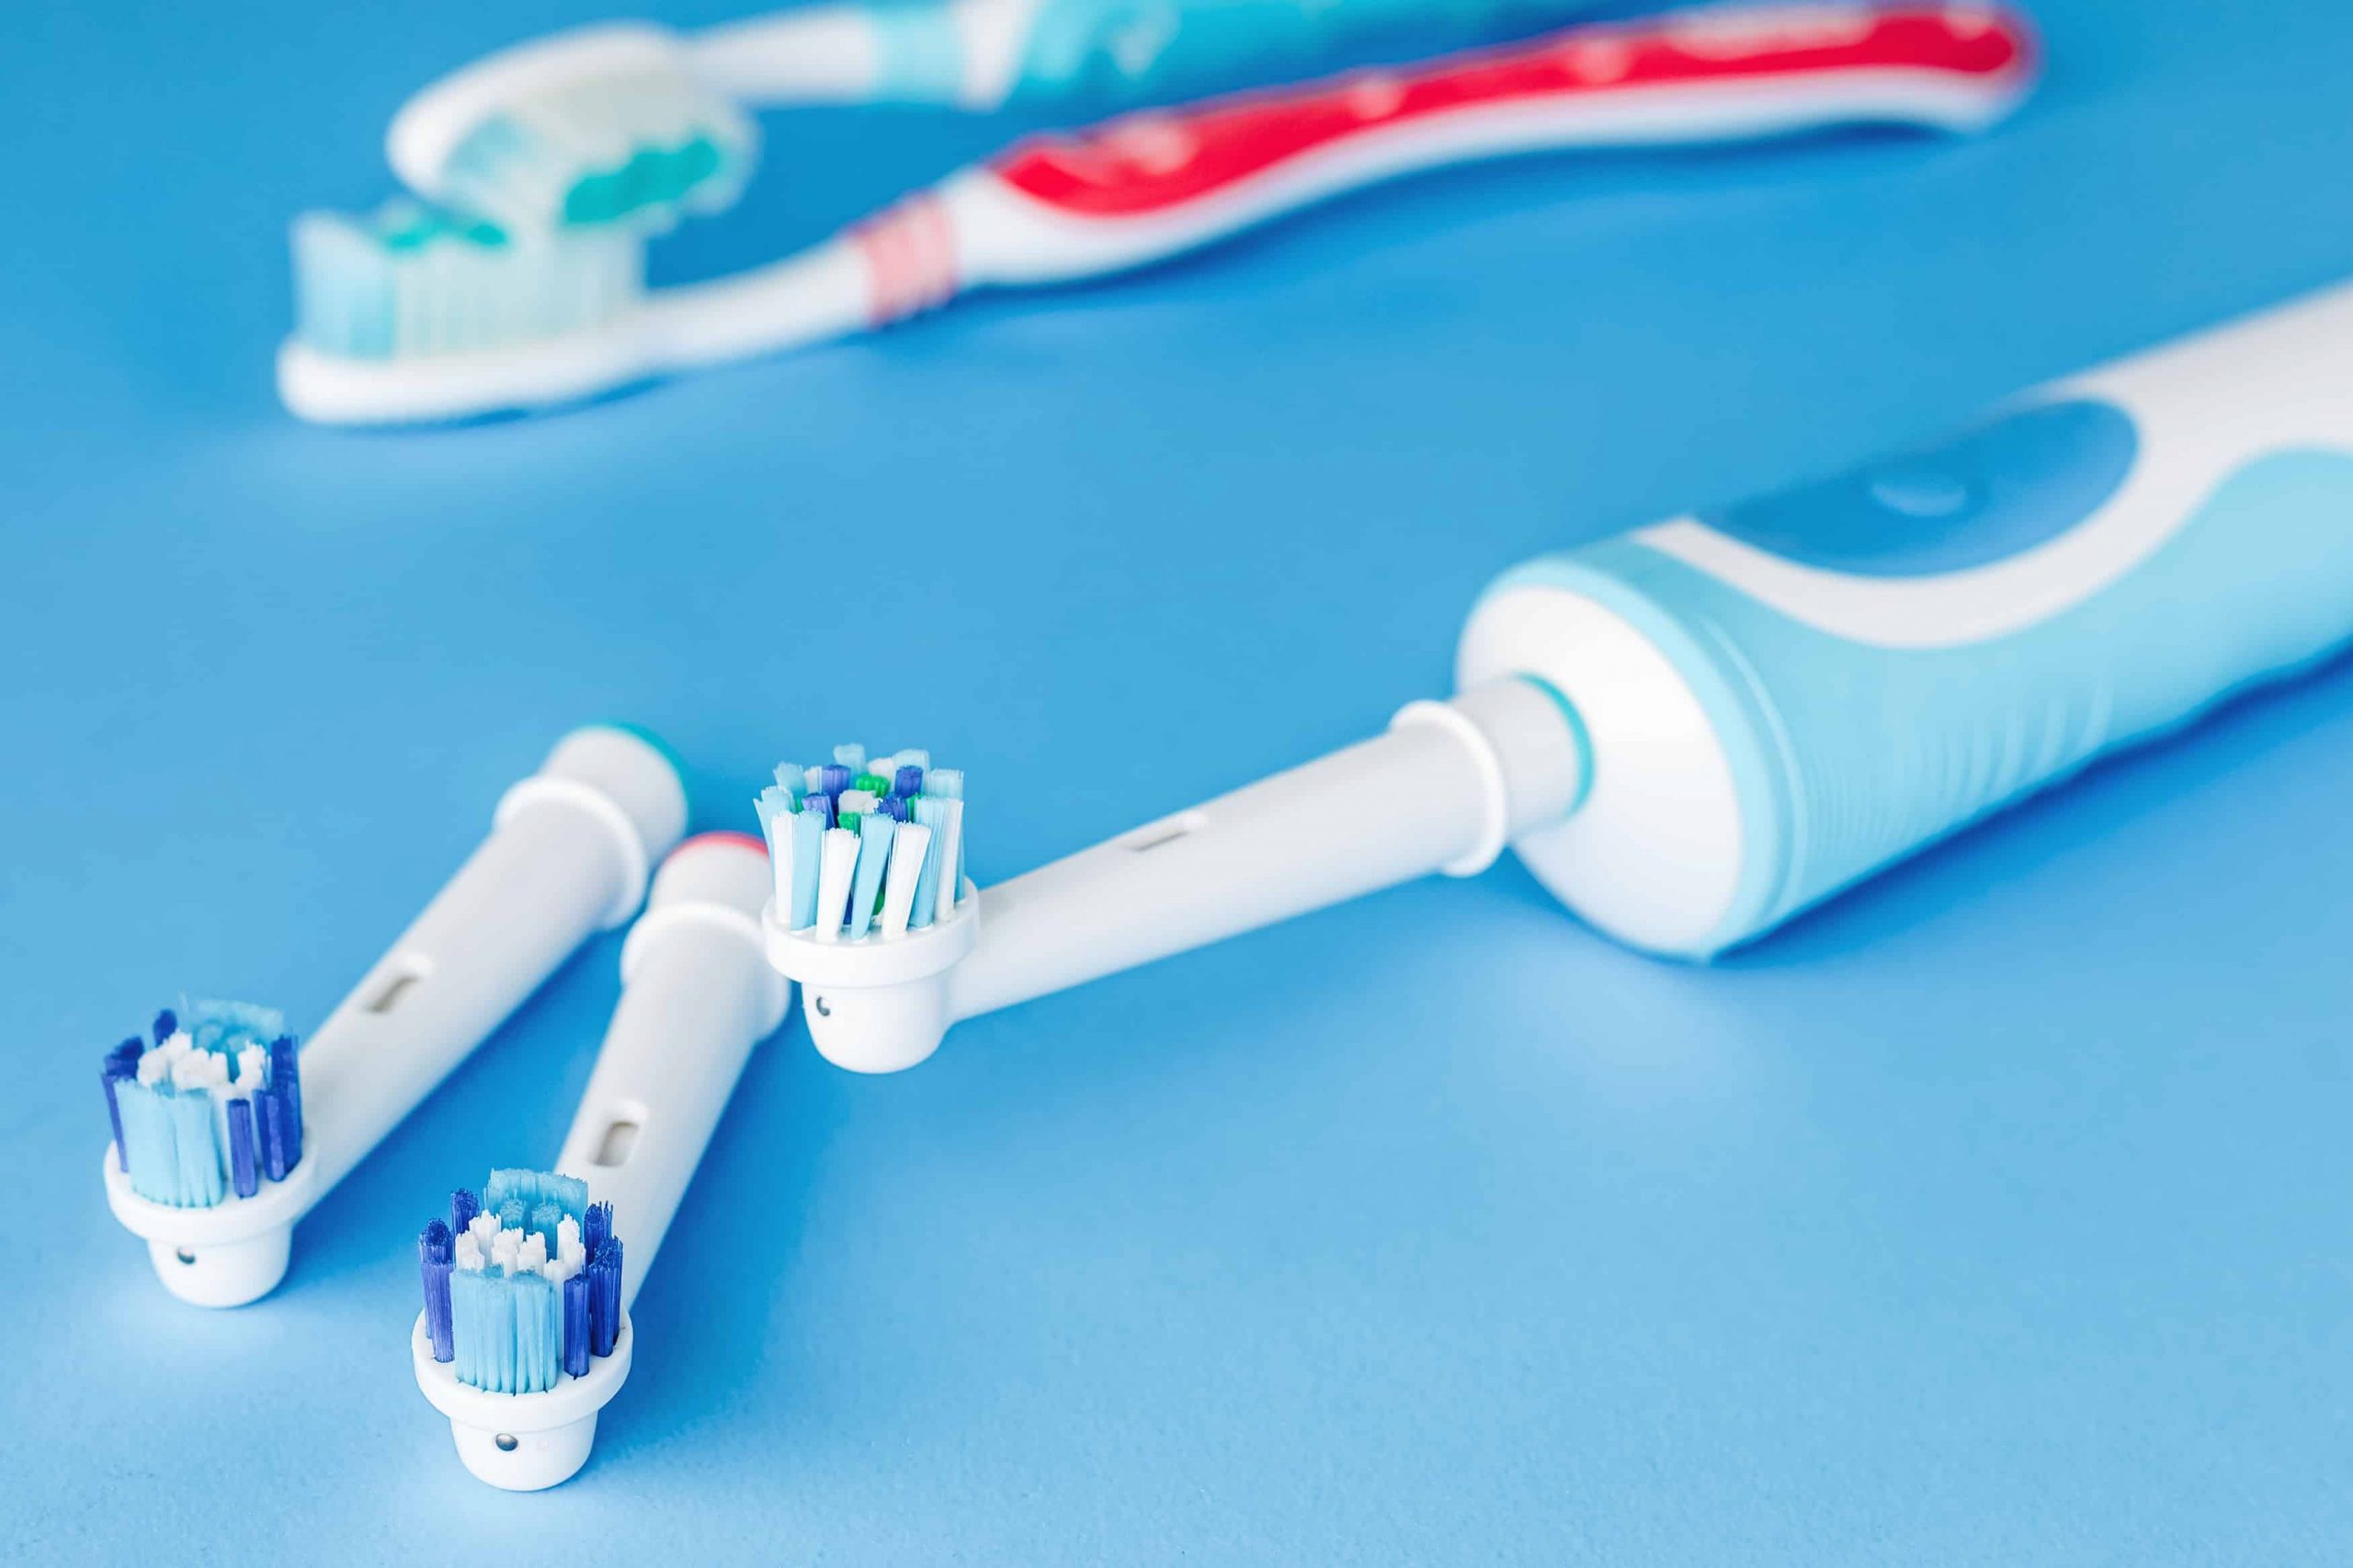 Electric Toothbrush Versus Manual Toothbrush: Which Is Better? 